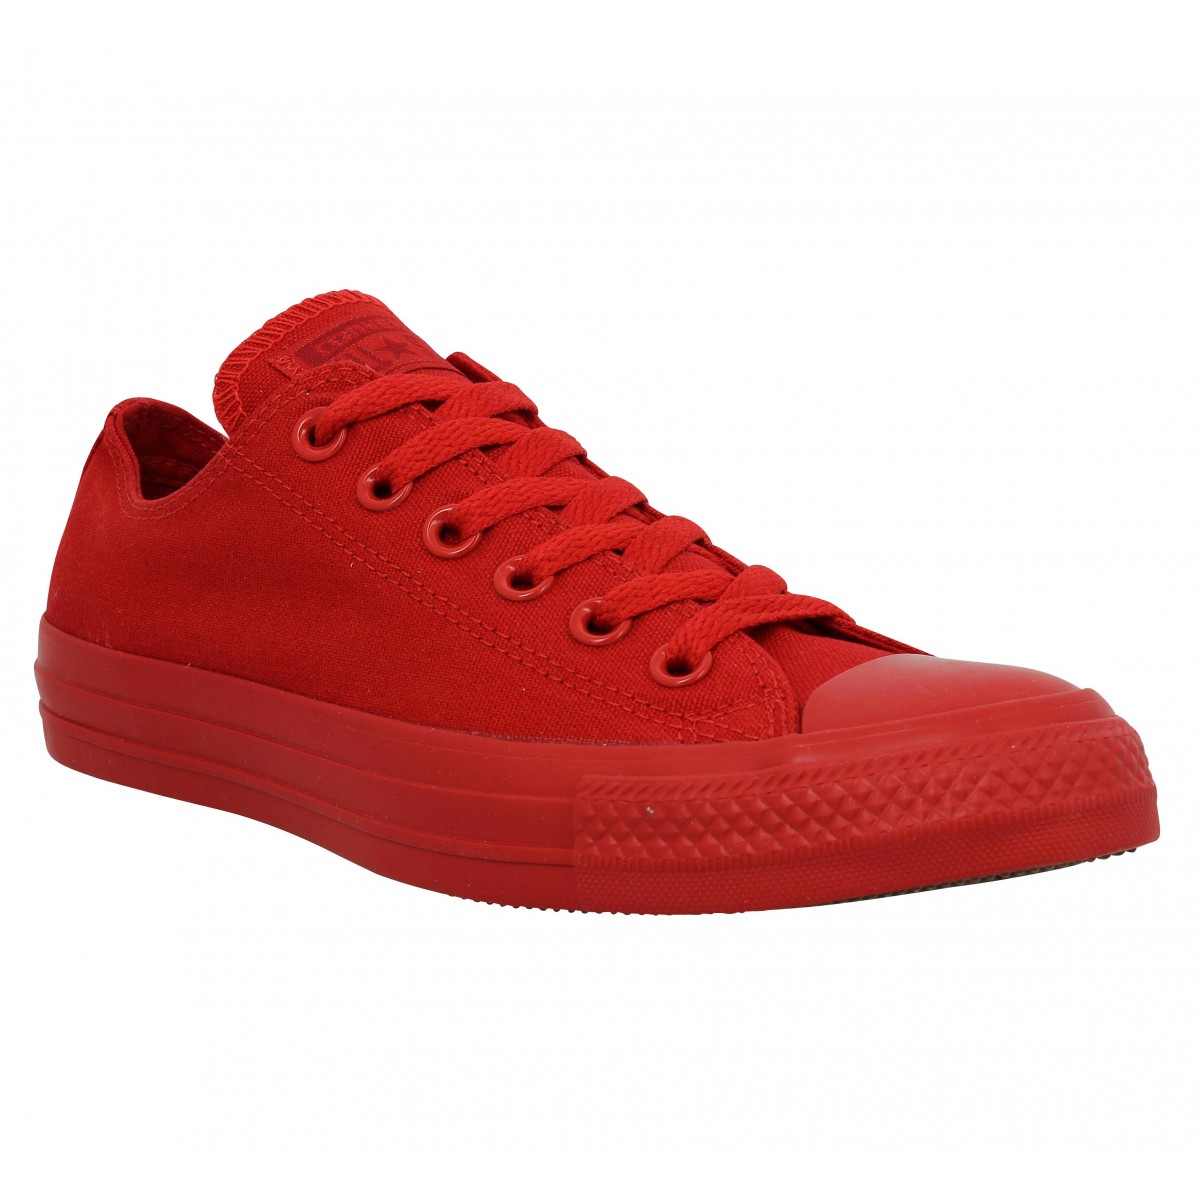 Baskets CONVERSE Chuck Taylor All Star toile Femme Mono Rouge